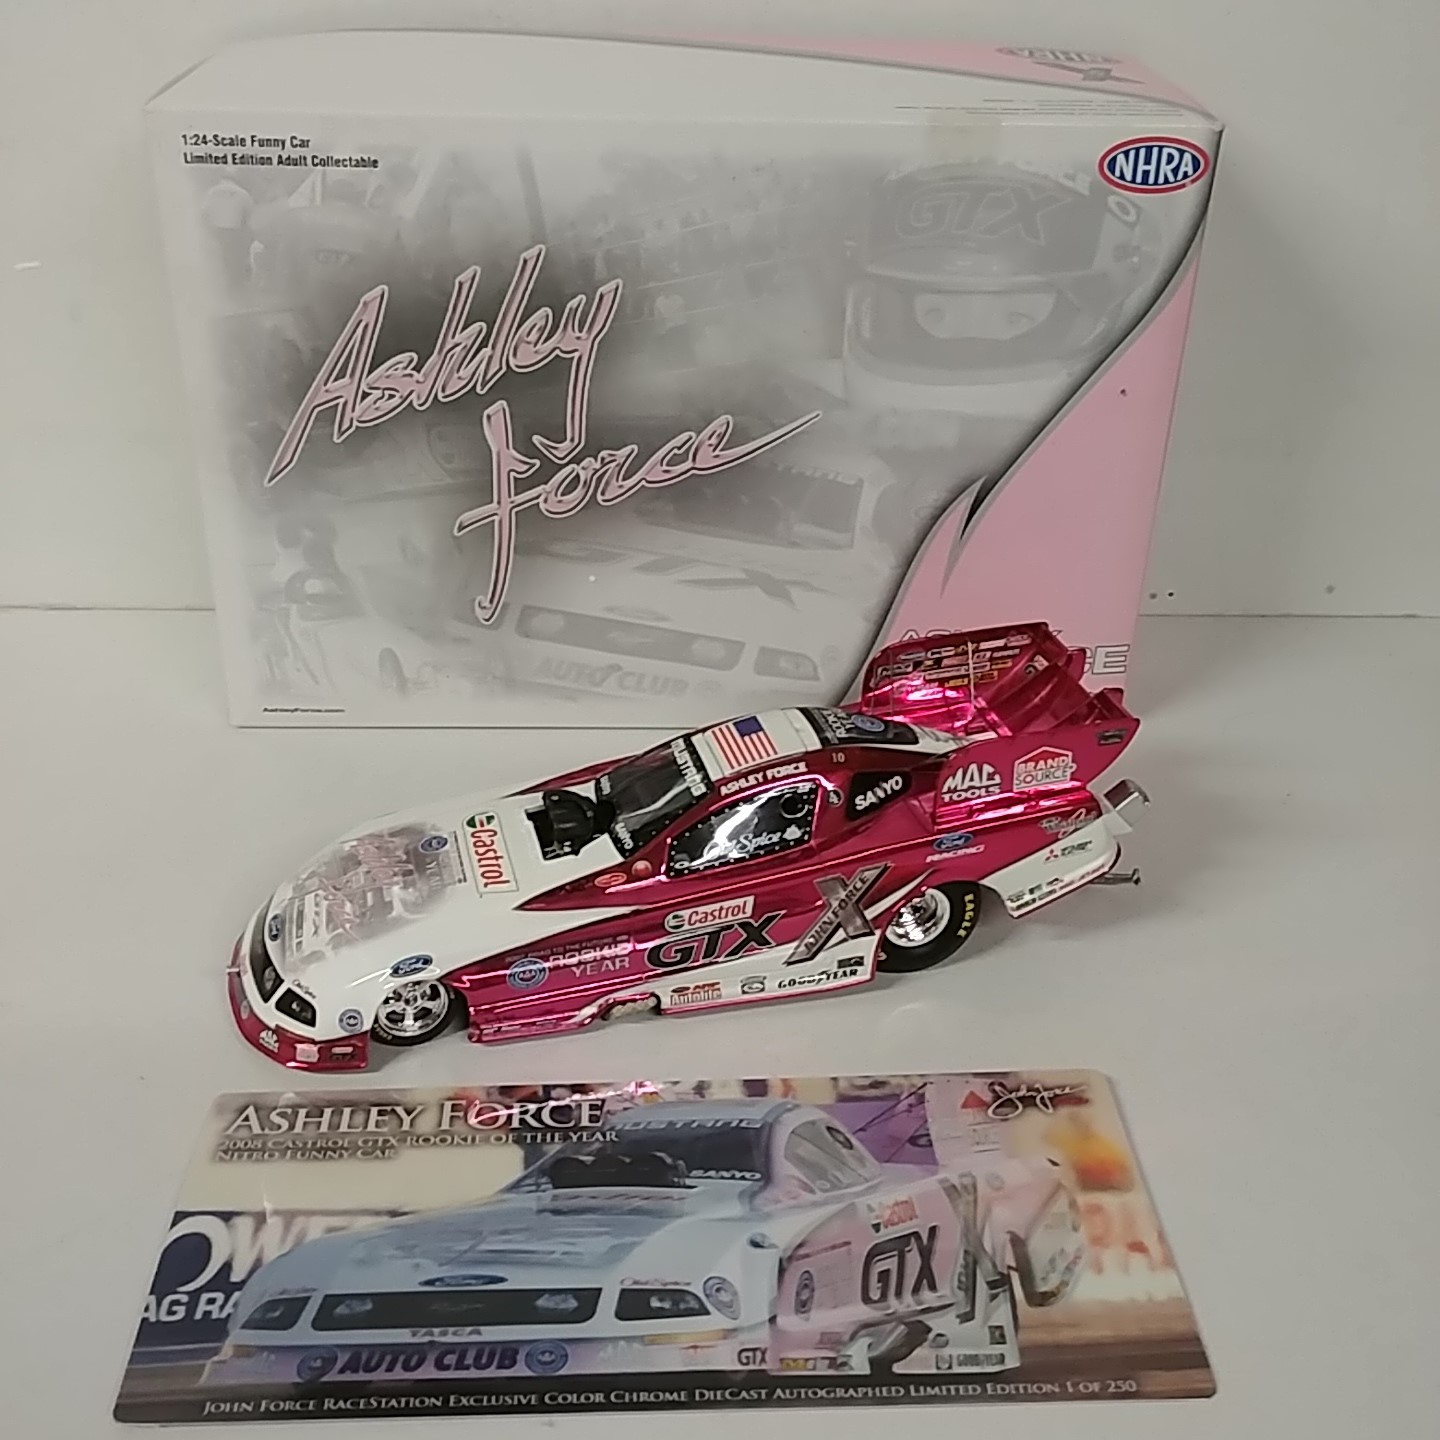 2008 Ashley Force 1/24th Castrol "Rookie of the Year" "Autographed" Color Chrome funny car